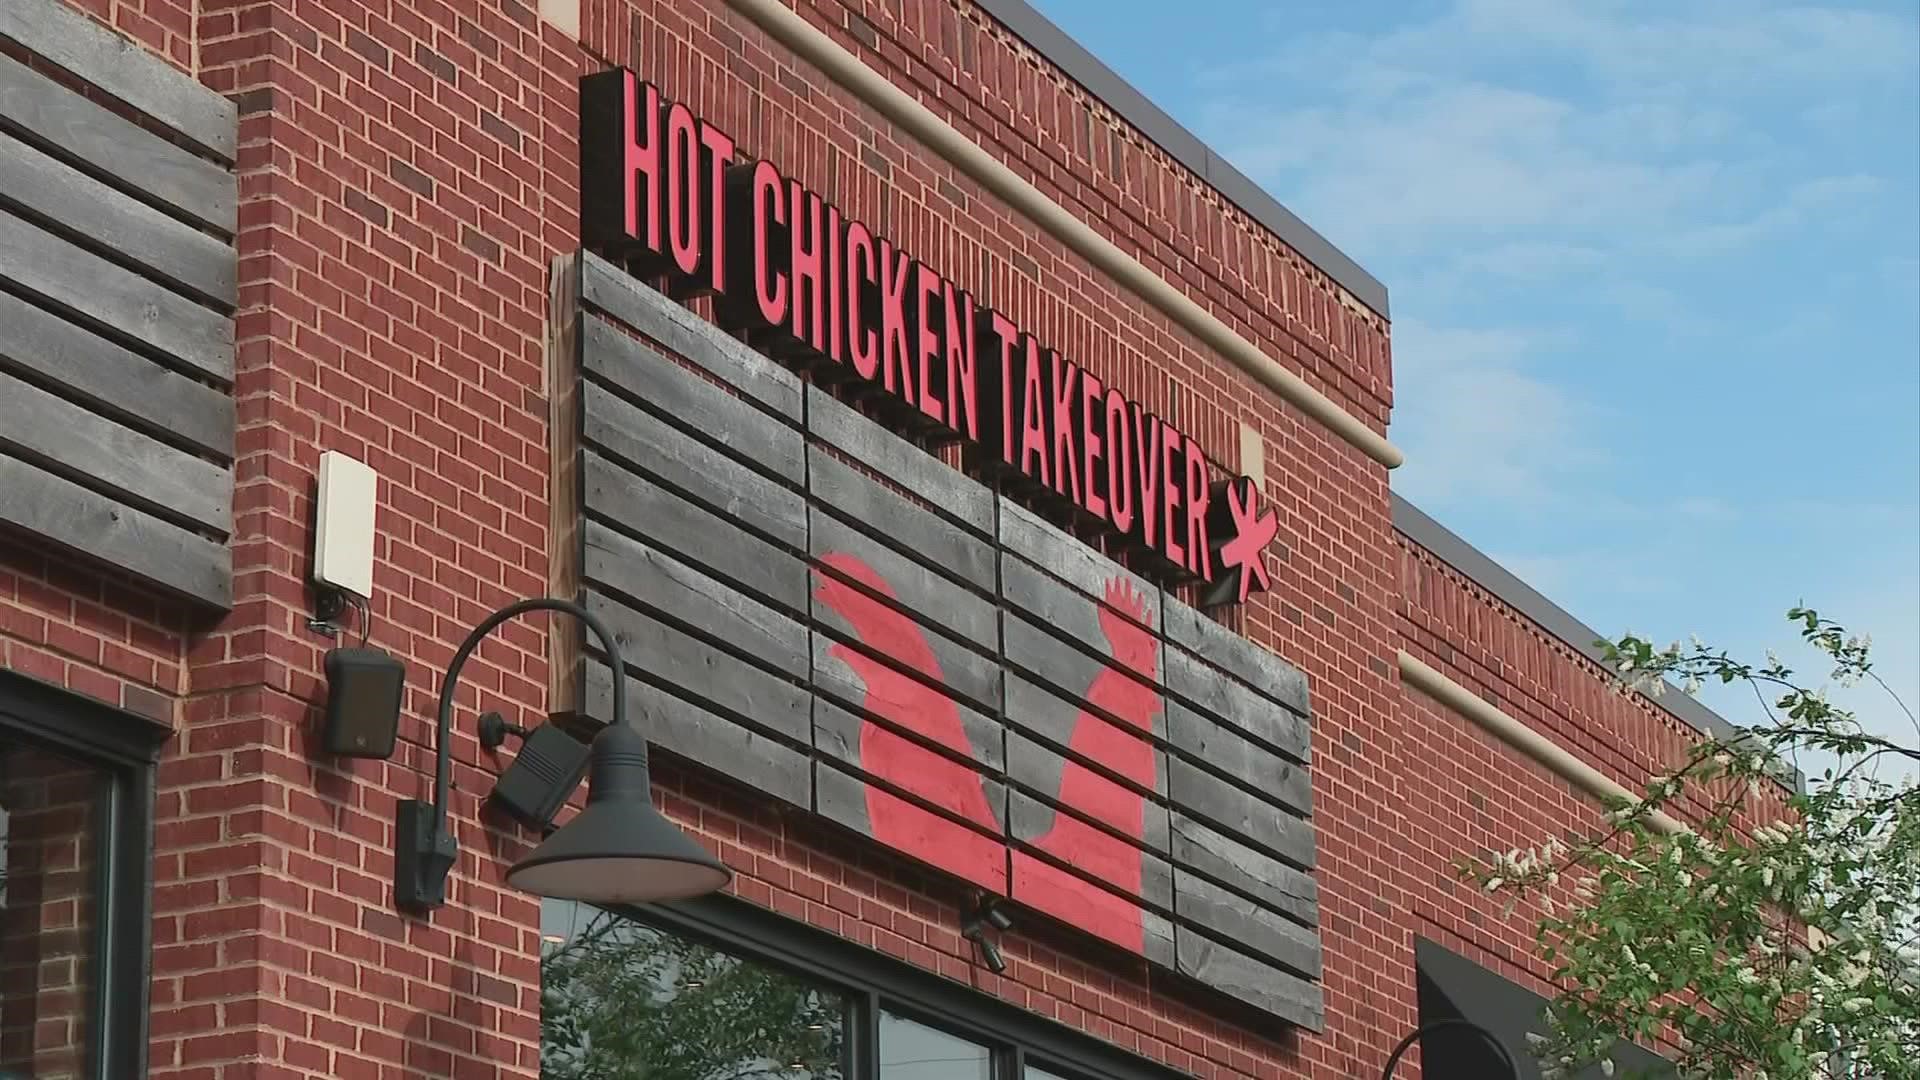 While other restaurants have struggled, the owners of Hot Chicken Takeover have not faced any issues with staffing or other problems brought on by the pandemic.